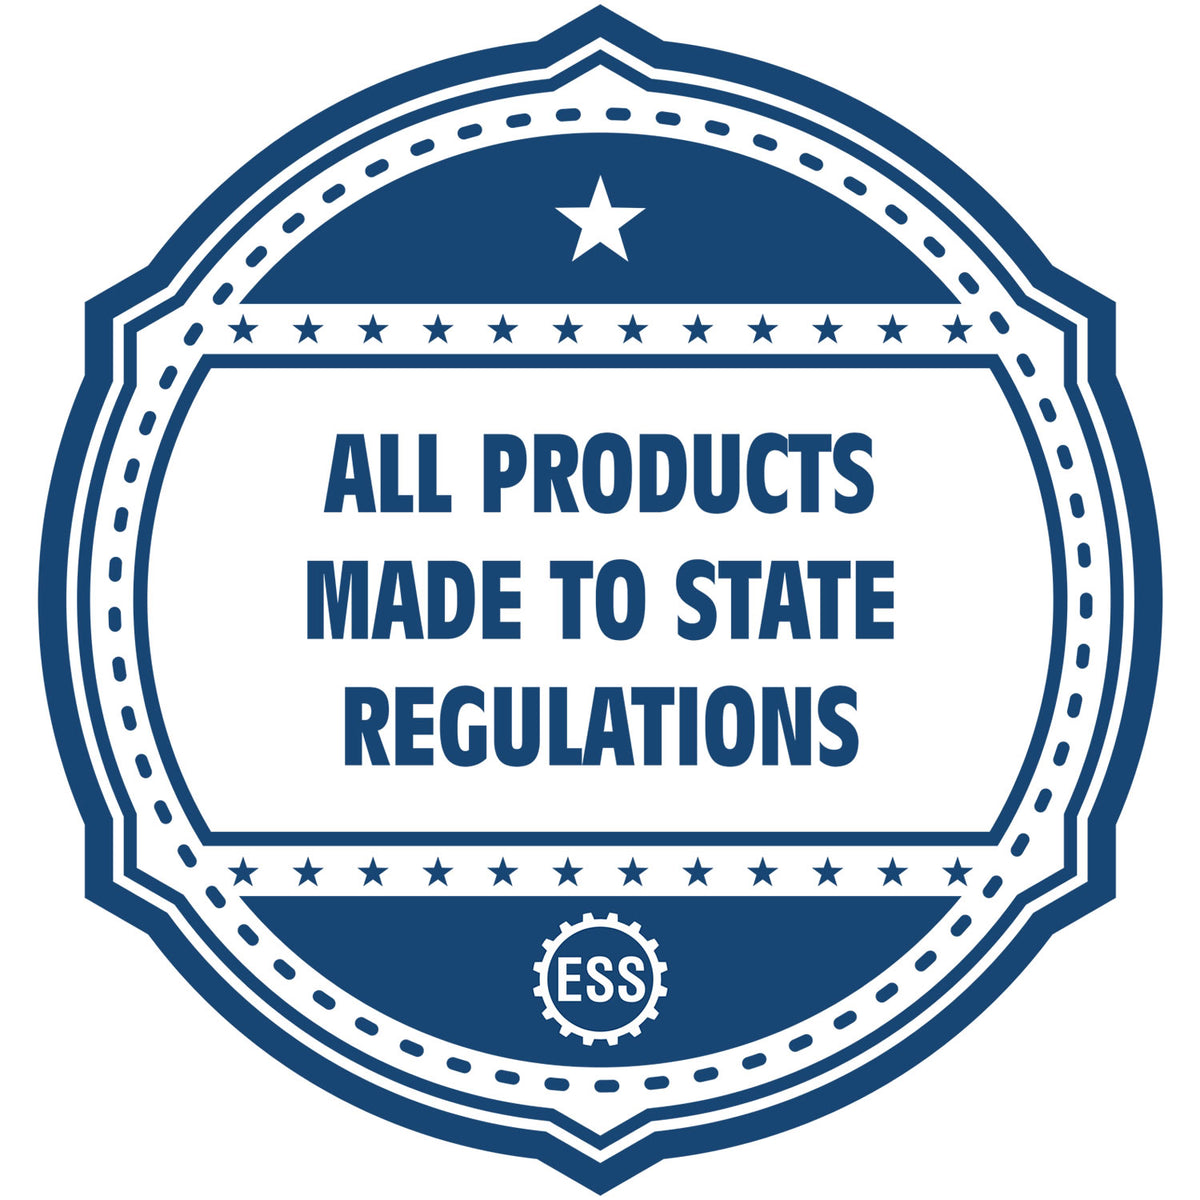 An icon or badge element for the Extended Long Reach Wyoming Architect Seal Embosser showing that this product is made in compliance with state regulations.